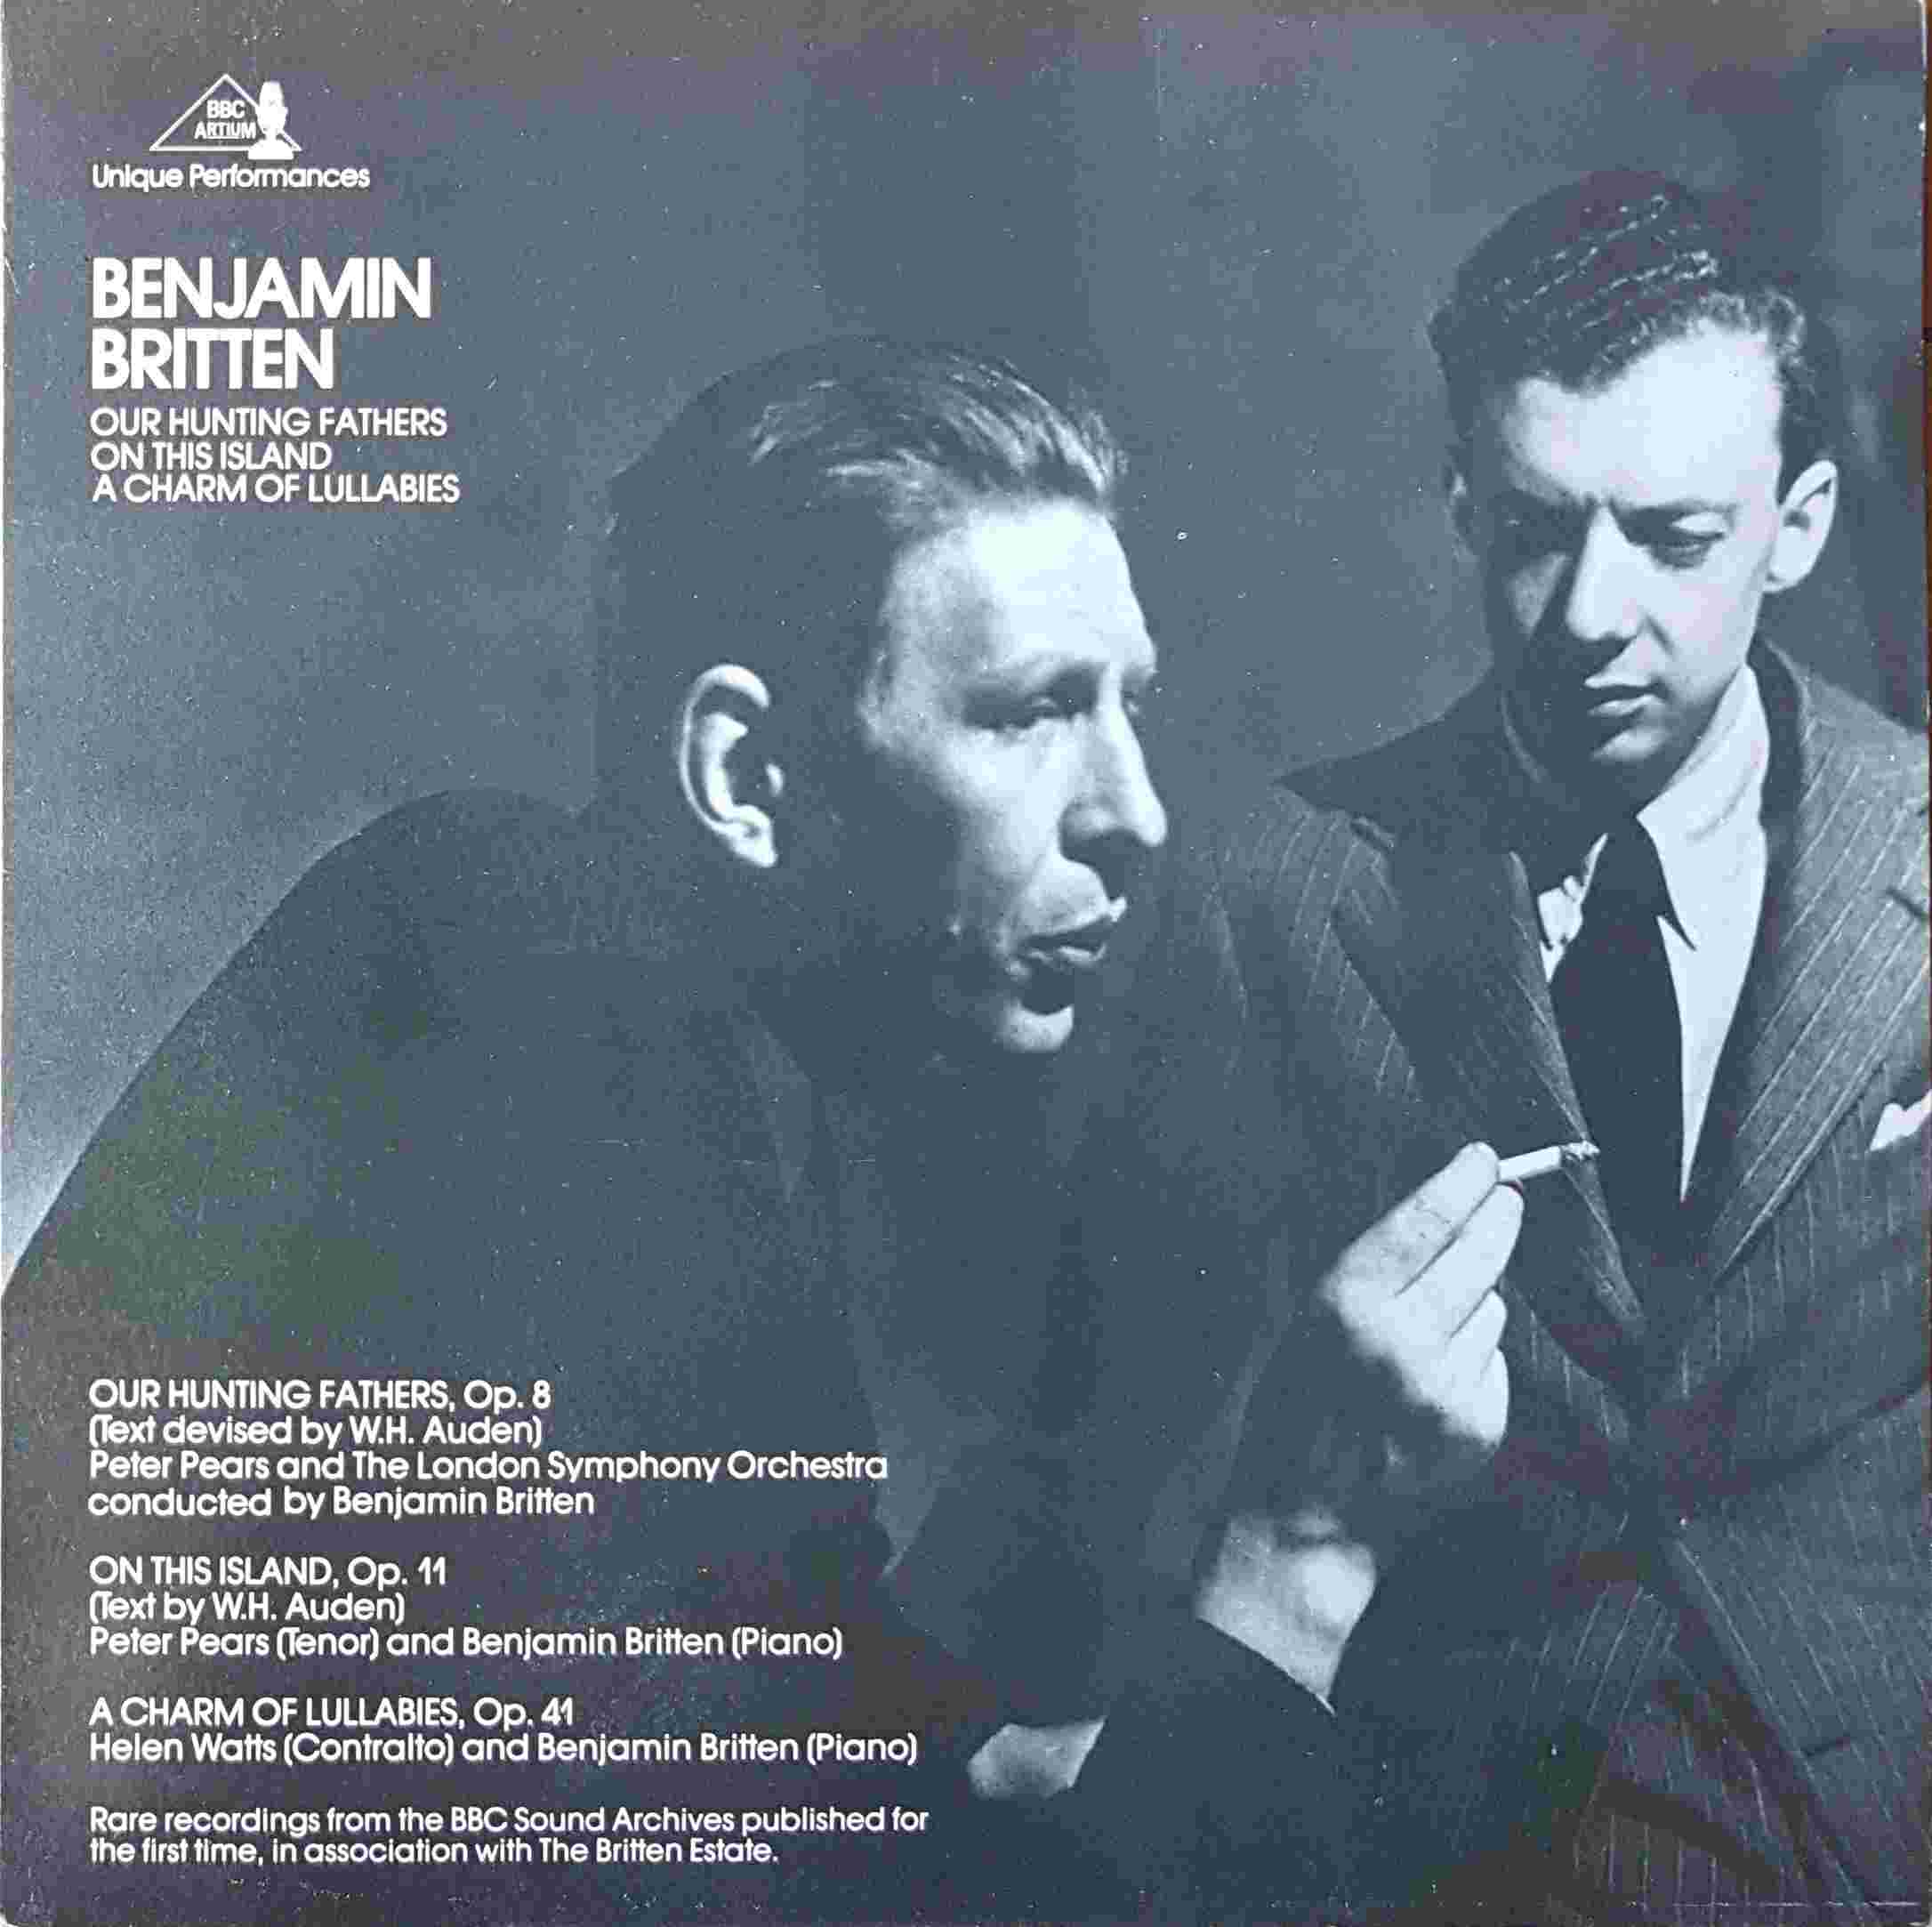 Picture of REGL 417 Benjamin Britten - Our hunting fathers by artist Benjamin Britten